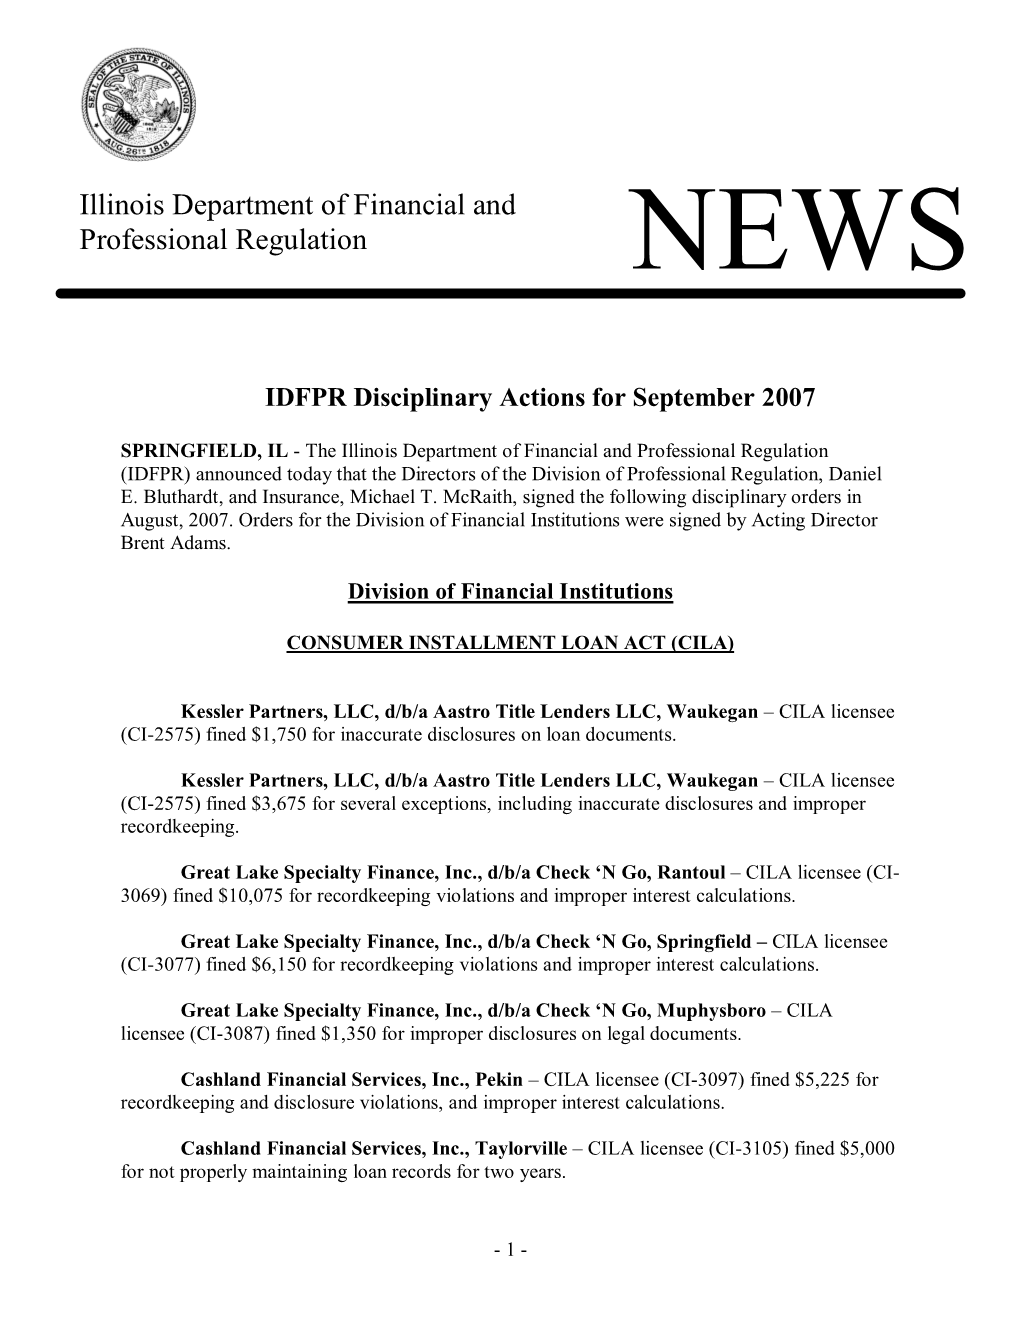 Illinois Department of Financial and Professional Regulation NEWS